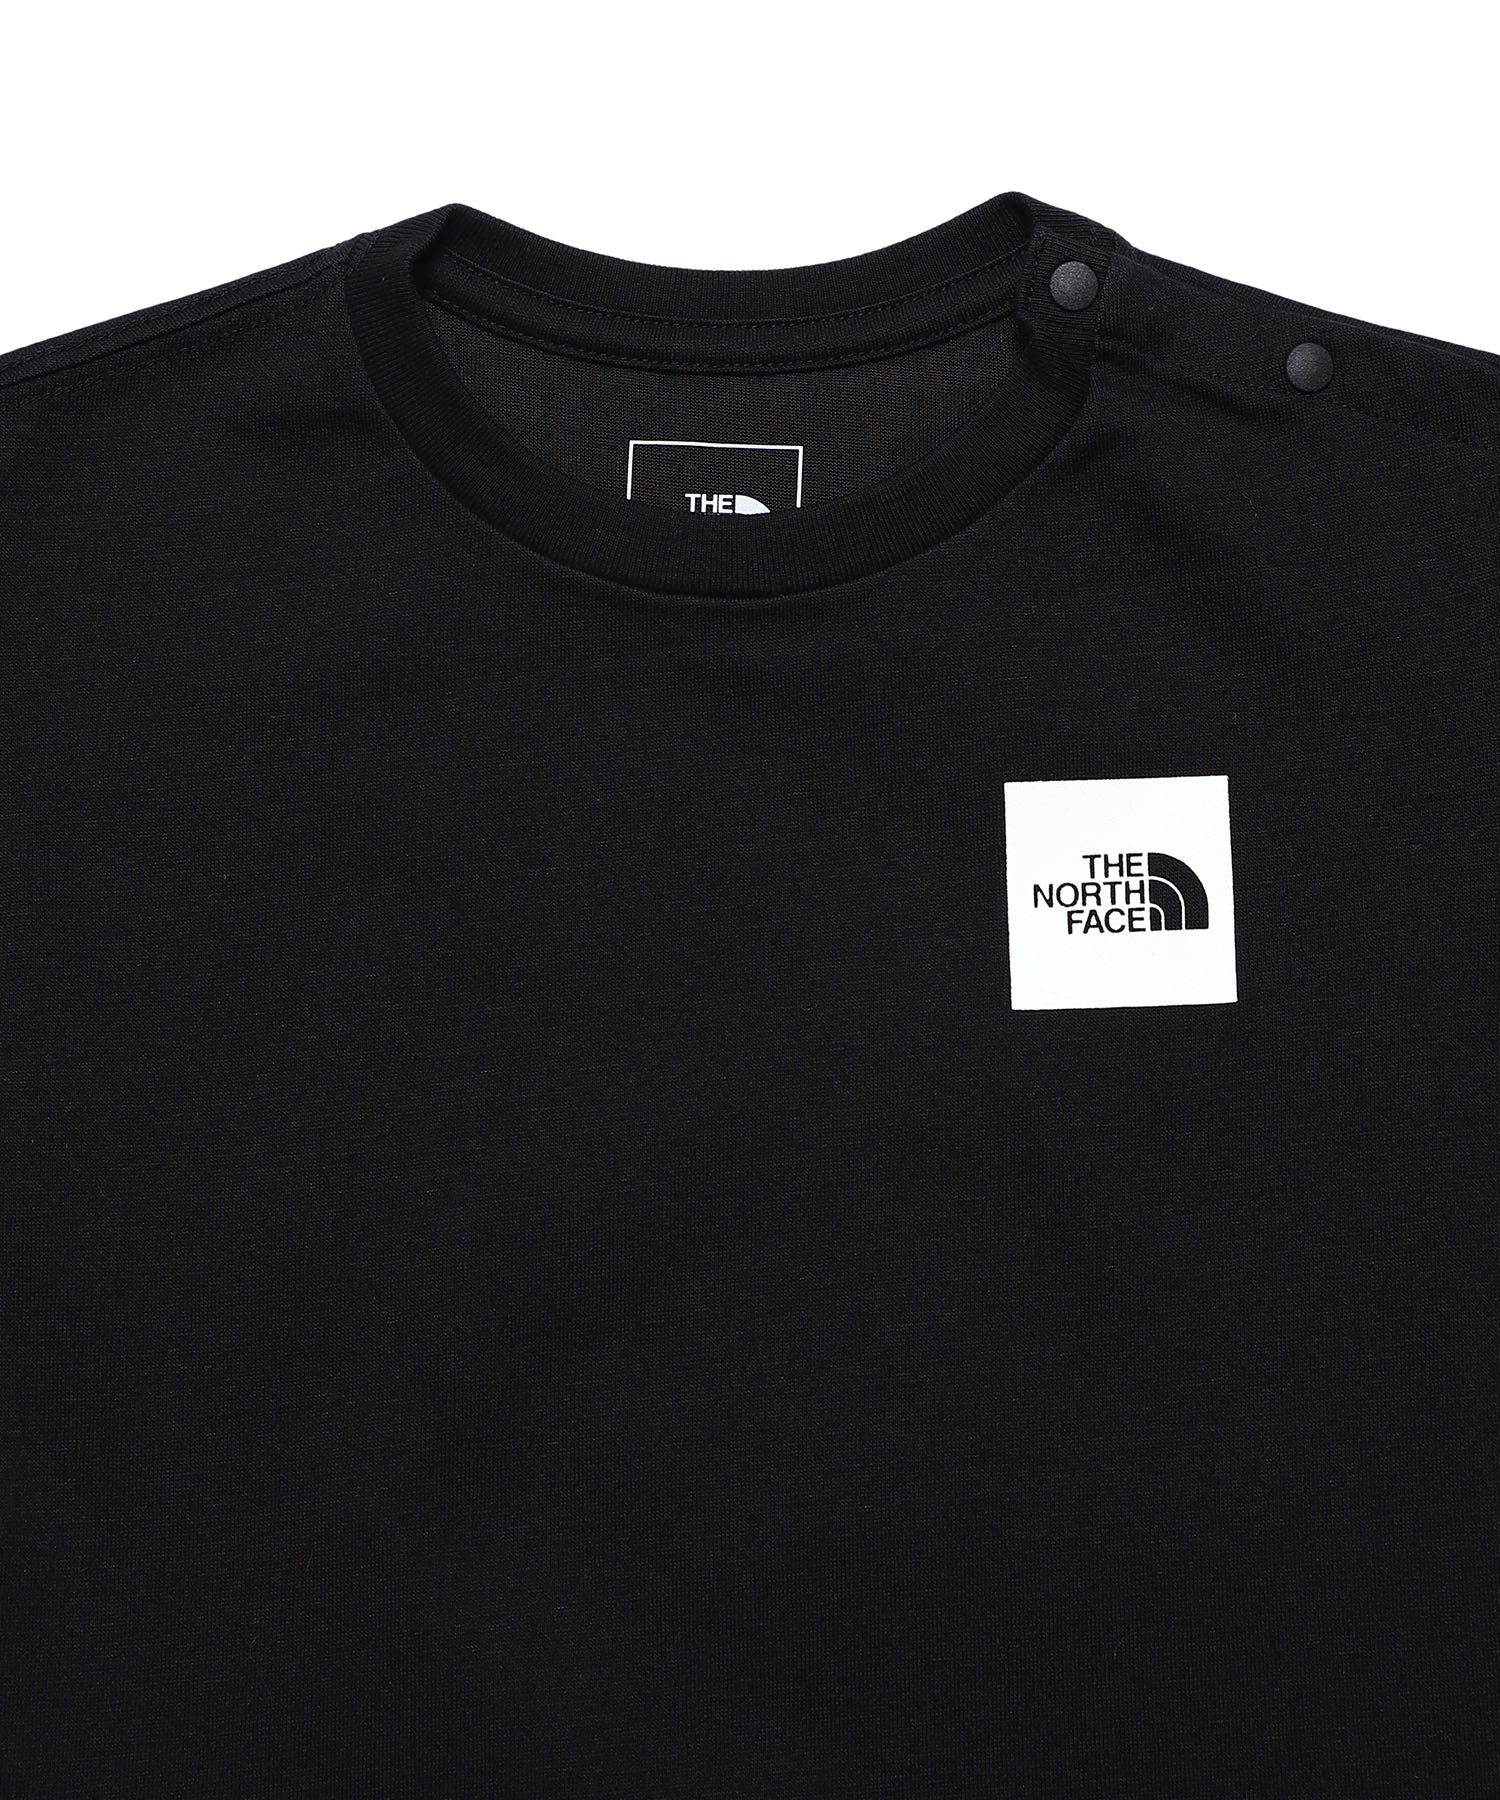 Baby S/S Small Square Logo Tee